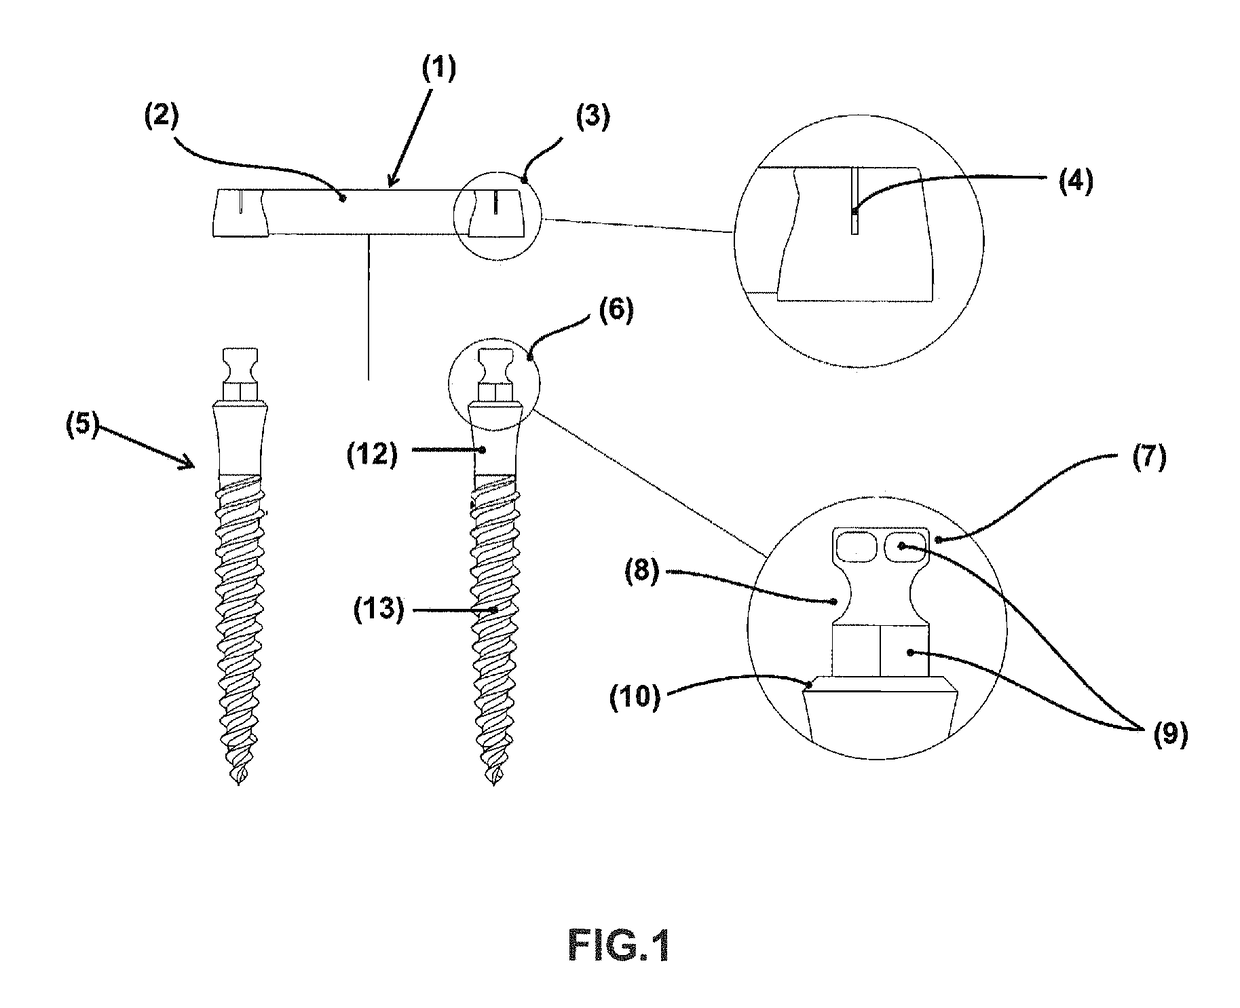 Prosthetic retention system for edentulous patients consisting of a prefabricated bar and two implants